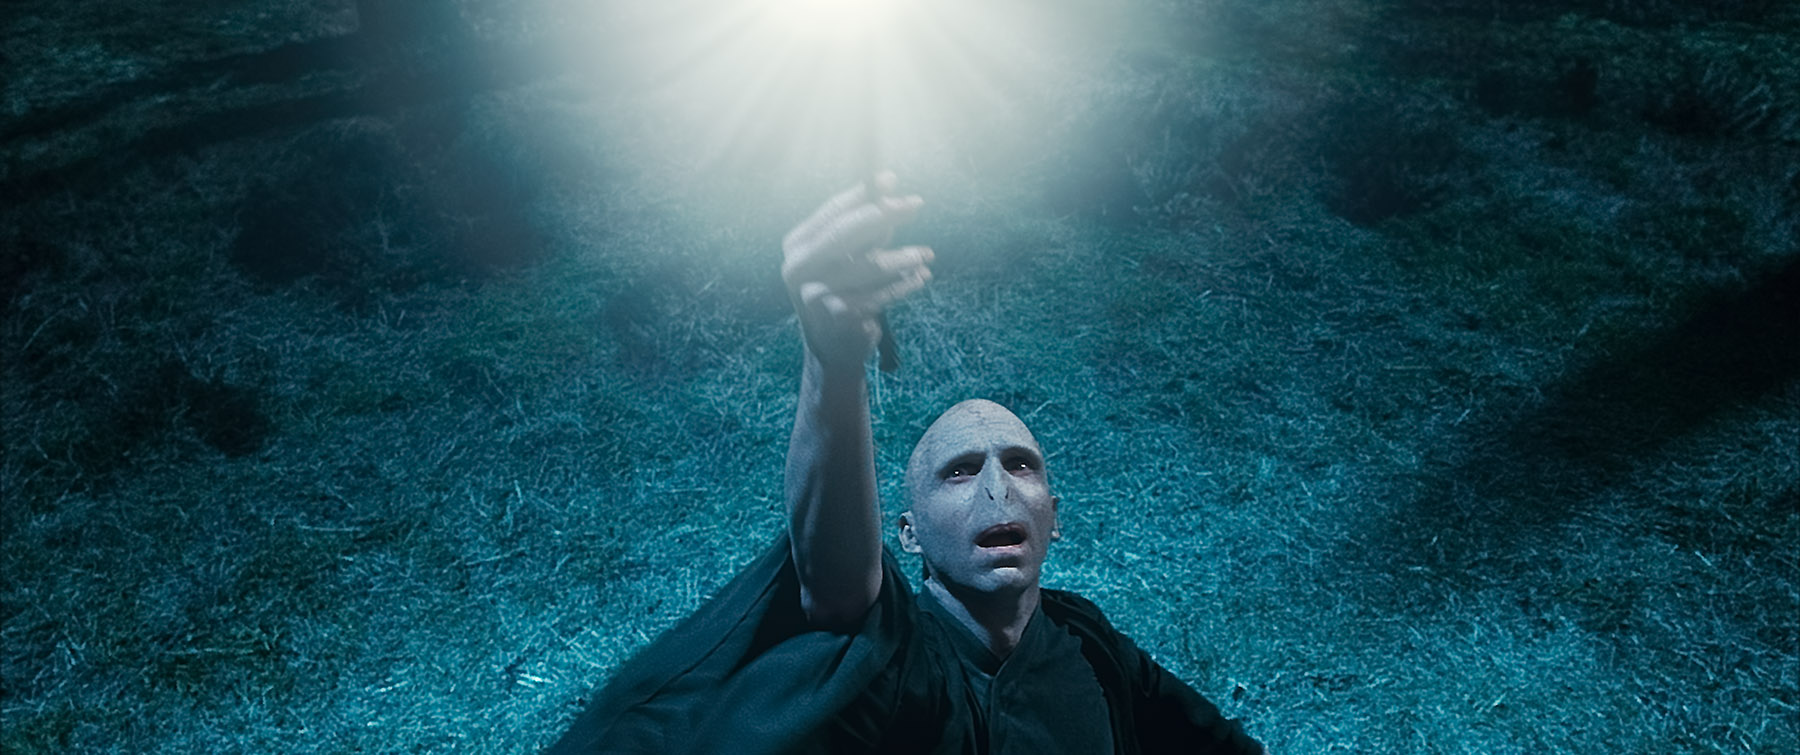 Voldemort Casting A Spell Wallpaper Click Picture For High